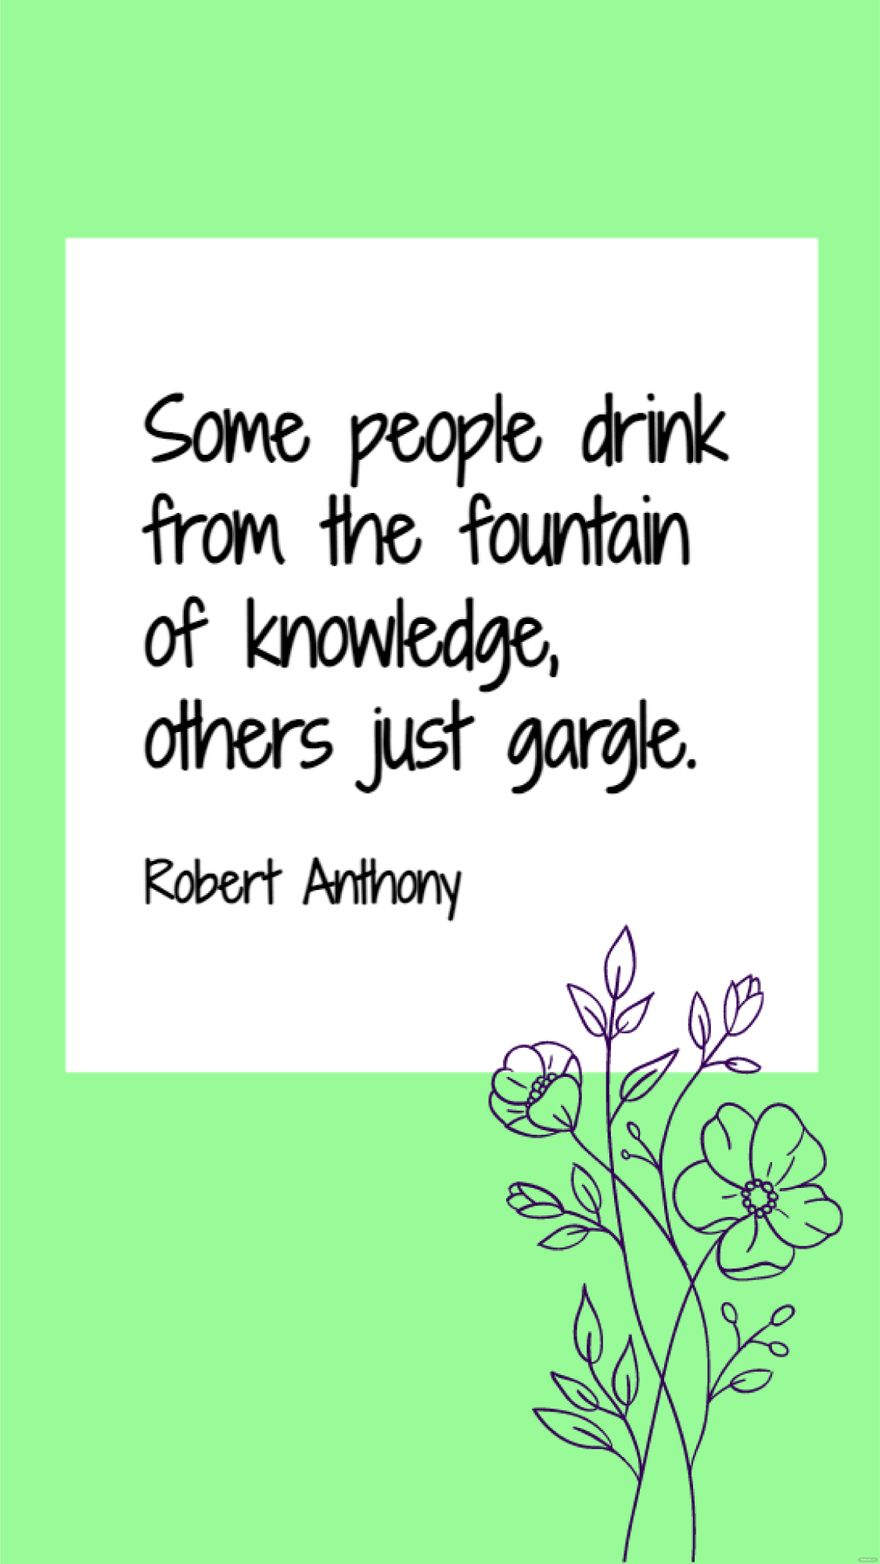 Robert Anthony - Some people drink from the fountain of knowledge, others just gargle.